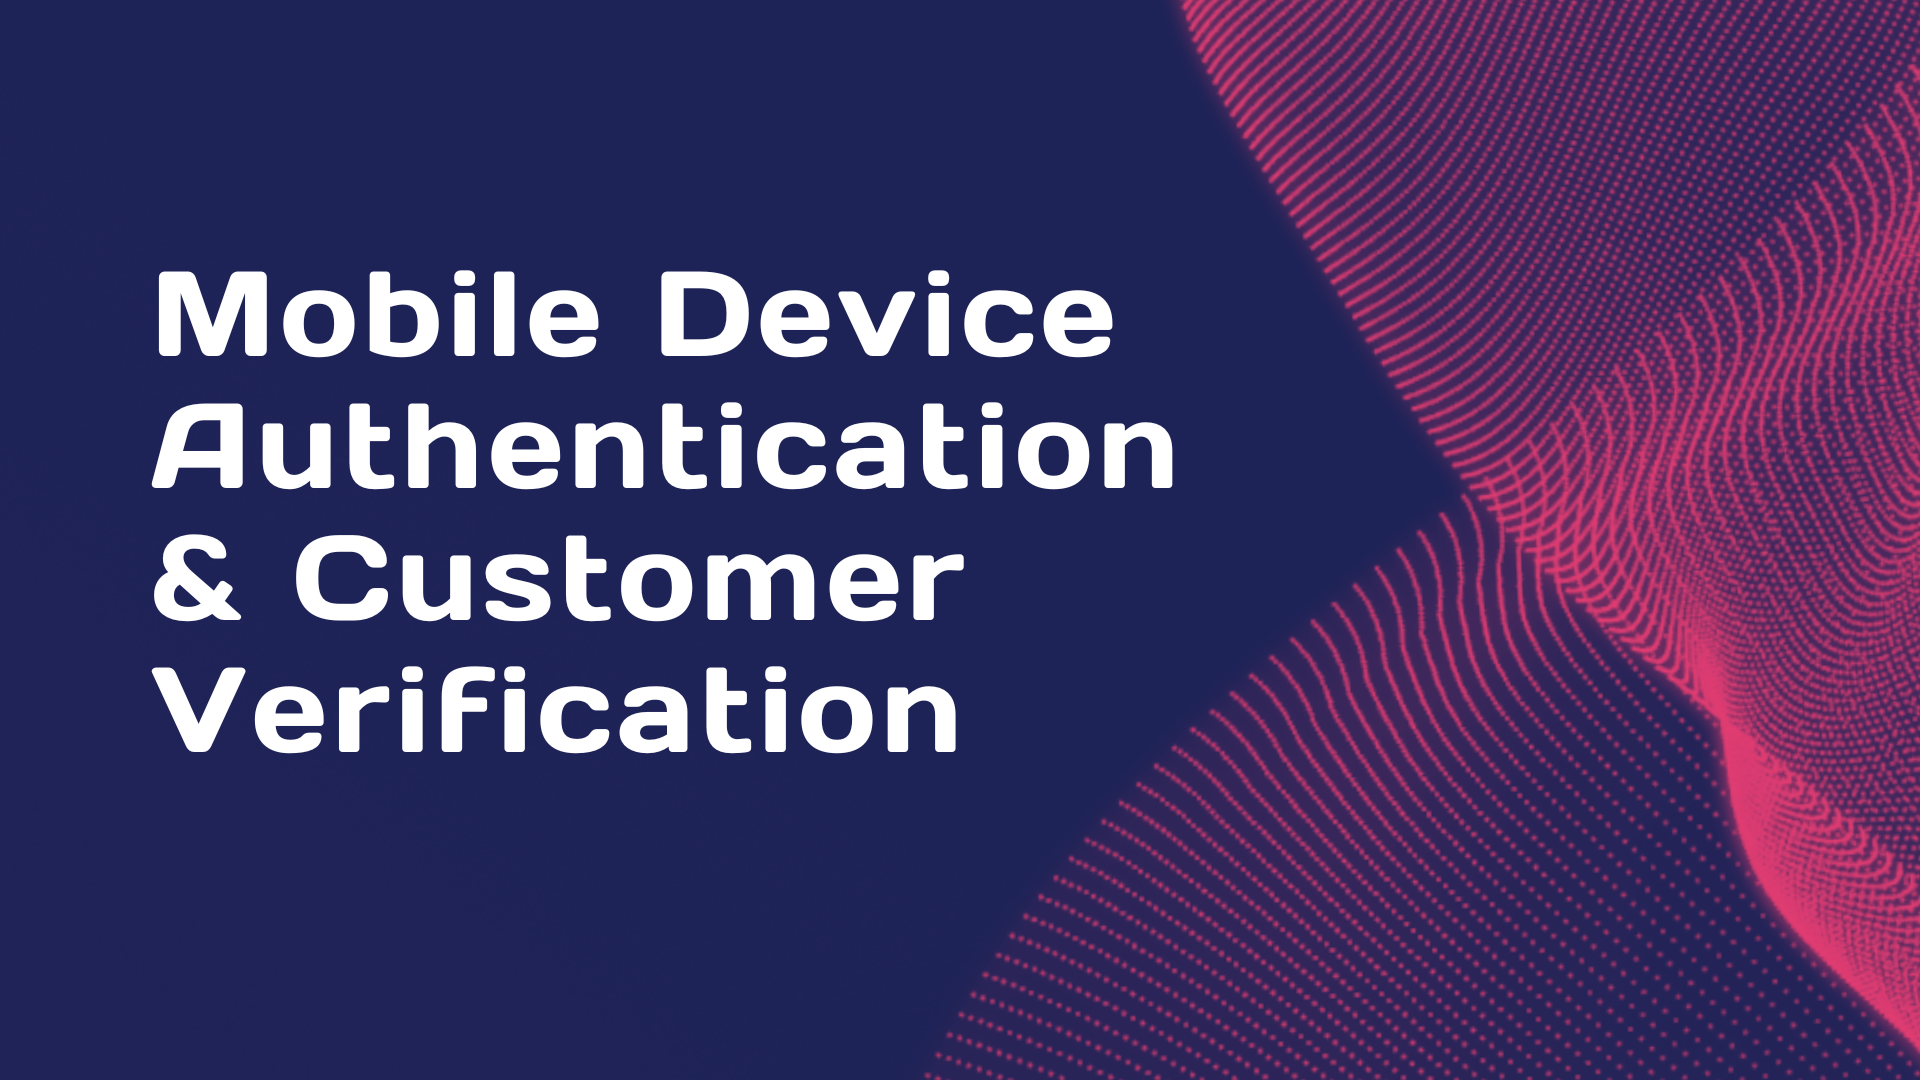 Card Payment Fraud - Module 3 : Mobile Device Authentication & Customer Verification